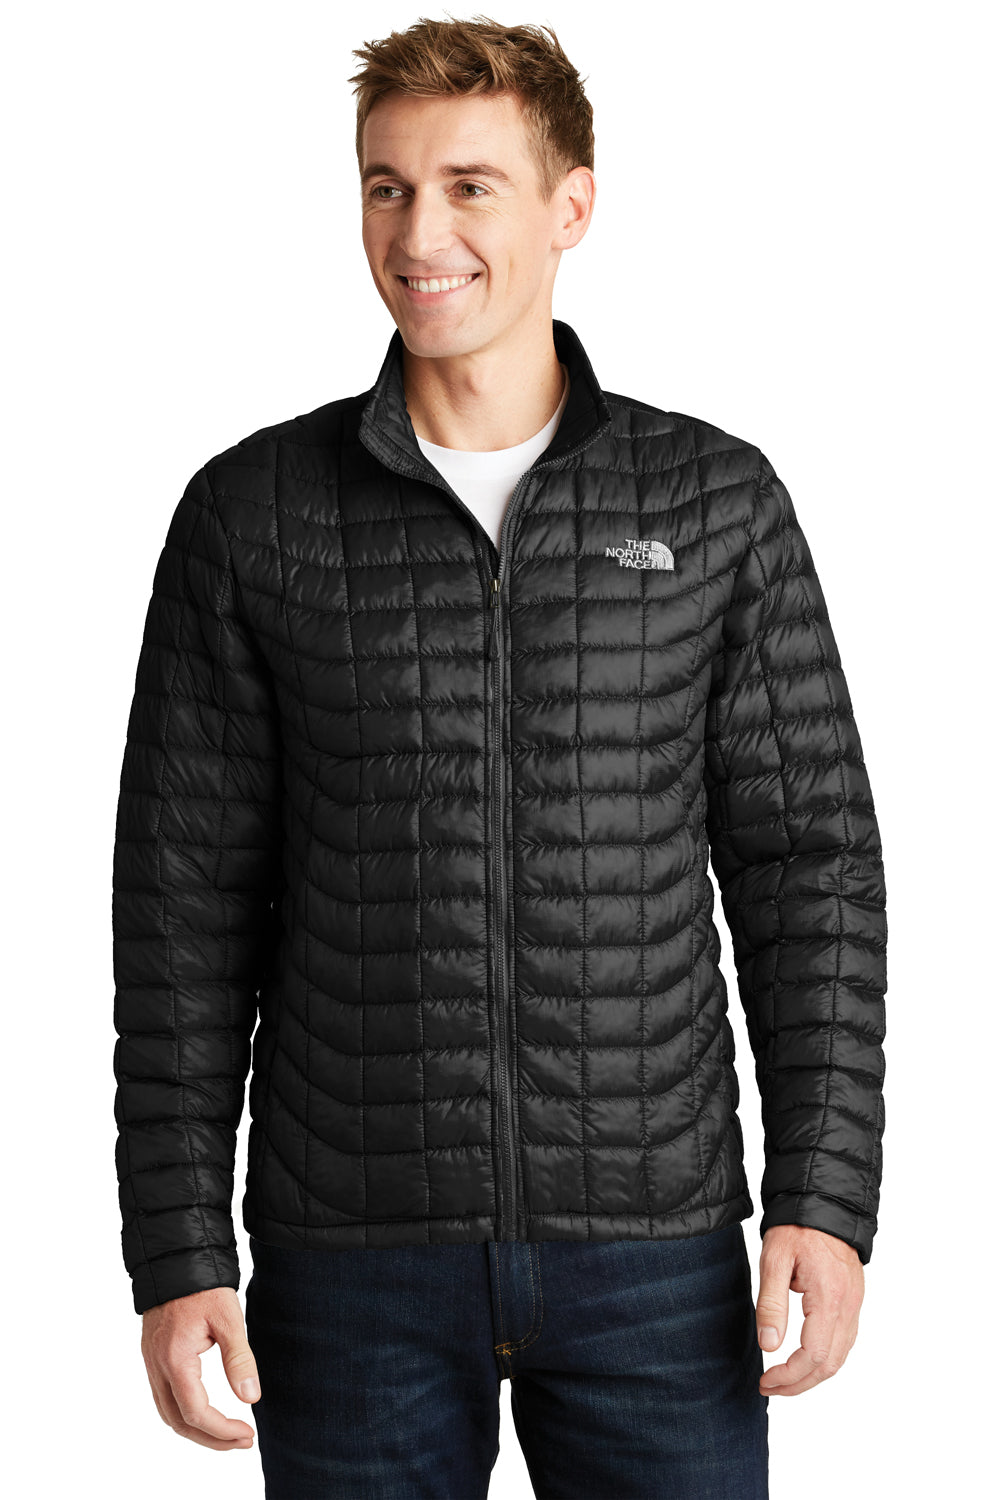 The North Face NF0A3LH2 Mens ThermoBall Trekker Water Resistant Full Zip Jacket Black Front